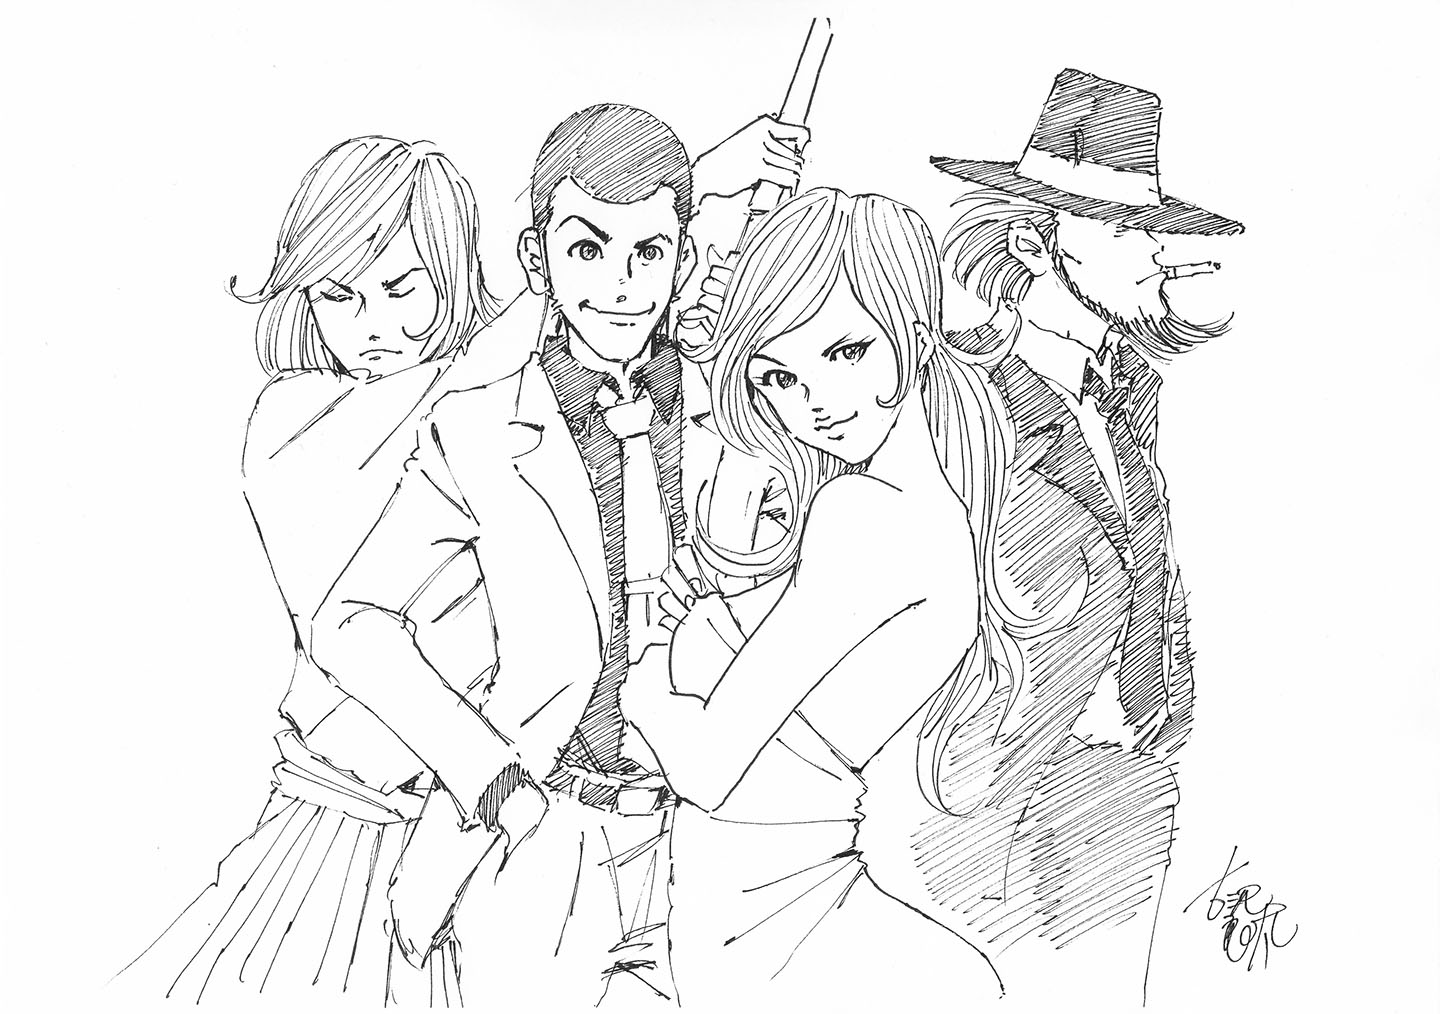 Lupin III’s Celebrates 50th Anniversary with Tributes